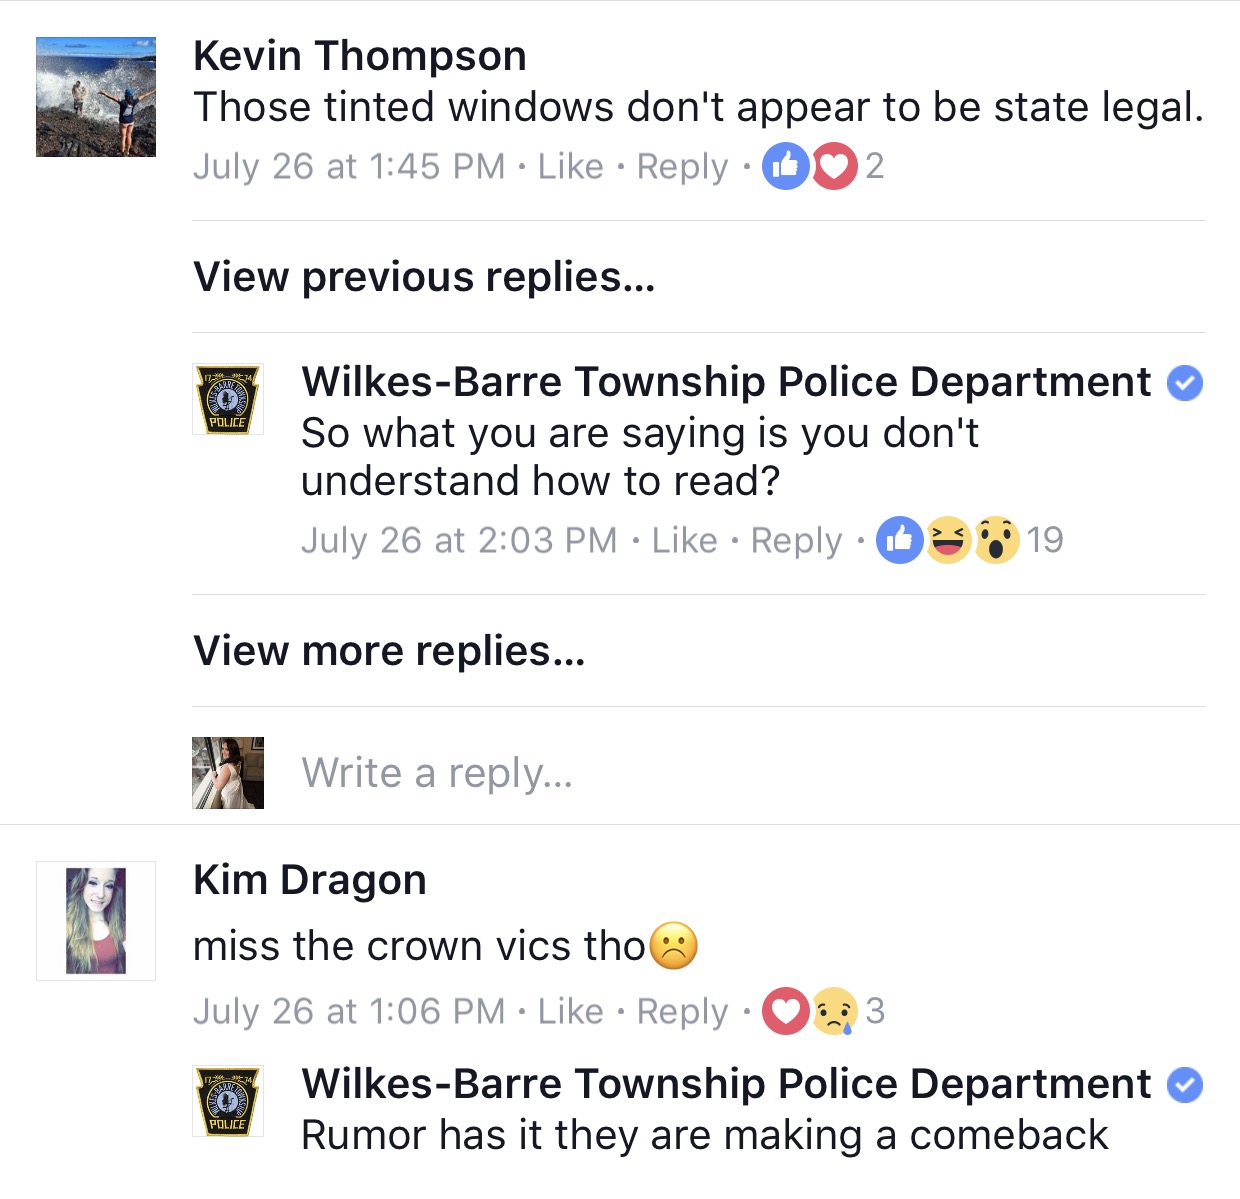 web page - Kevin Thompson Those tinted windows don't appear to be state legal. July 26 at O 2 View previous replies... bo WilkesBarre Township Police Department So what you are saying is you don't understand how to read? July 26 at . 19 View more replies.